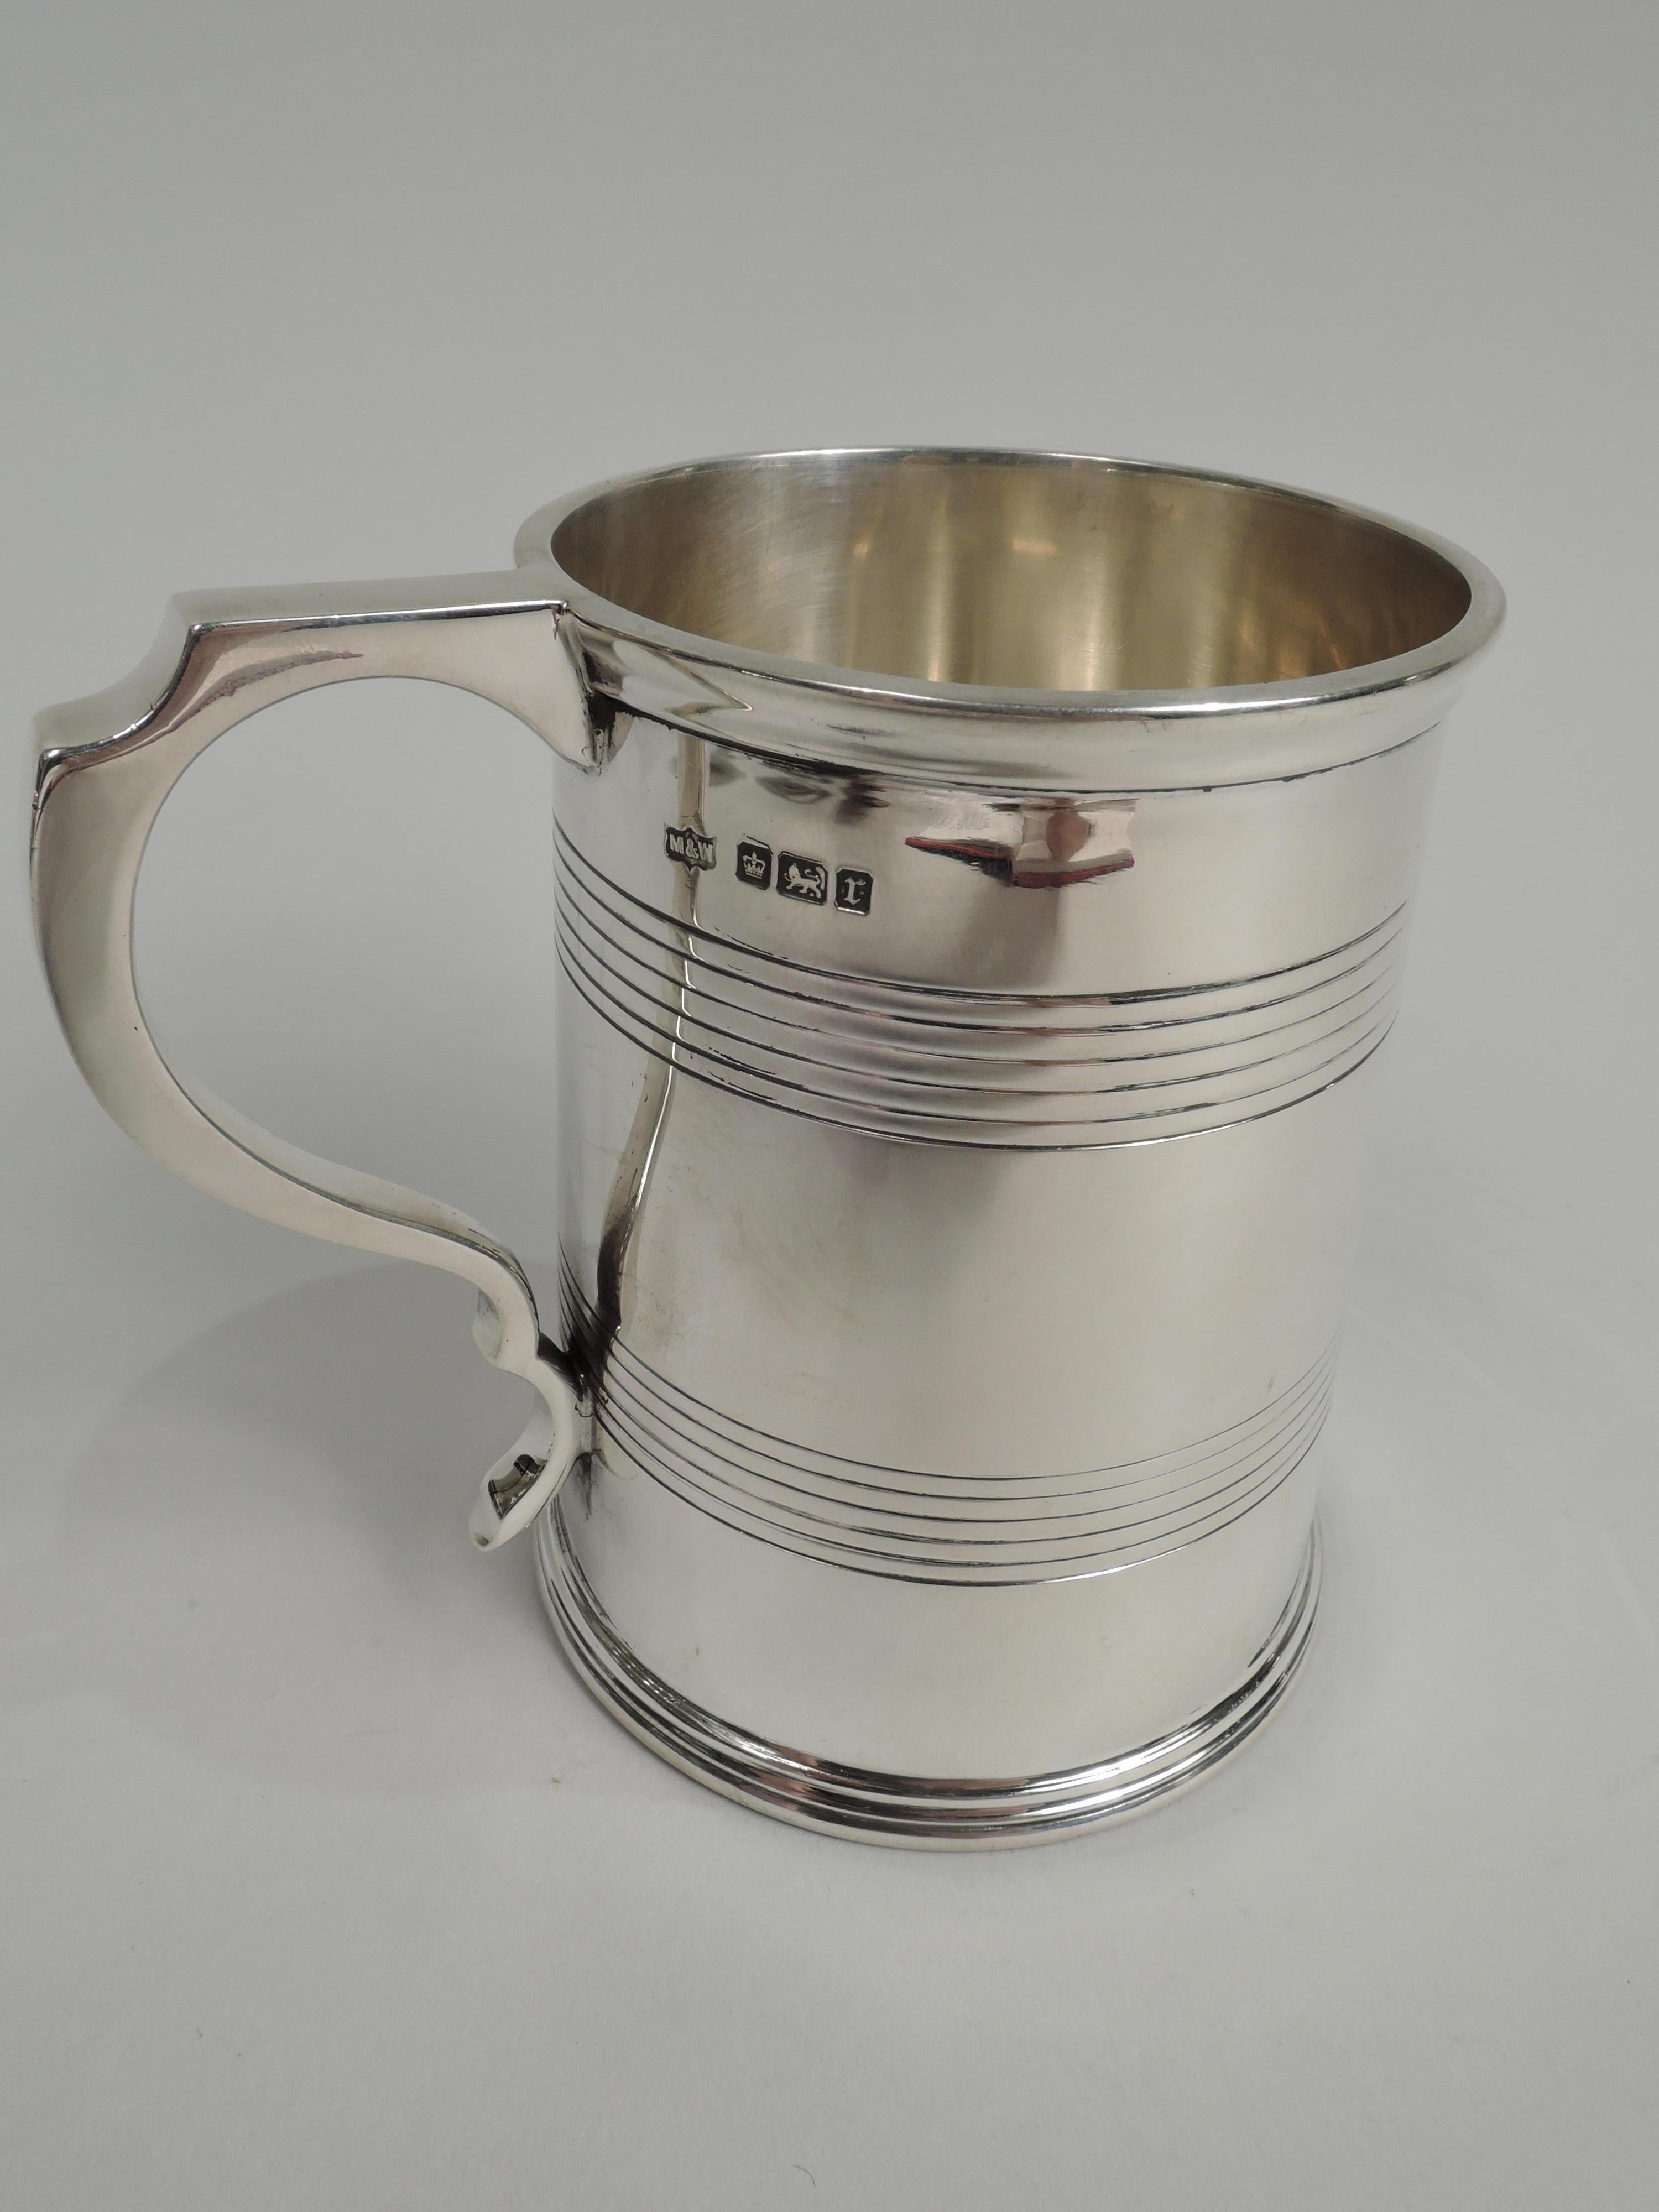 Edwardian Georgian sterling silver baby cup. Made by Mappin & Webb in Sheffield in 1909. Straight and upward tapering sides with reeded bands and double-scroll handle. Traditional with nice heft and plenty of room for engraving. Fully marked.